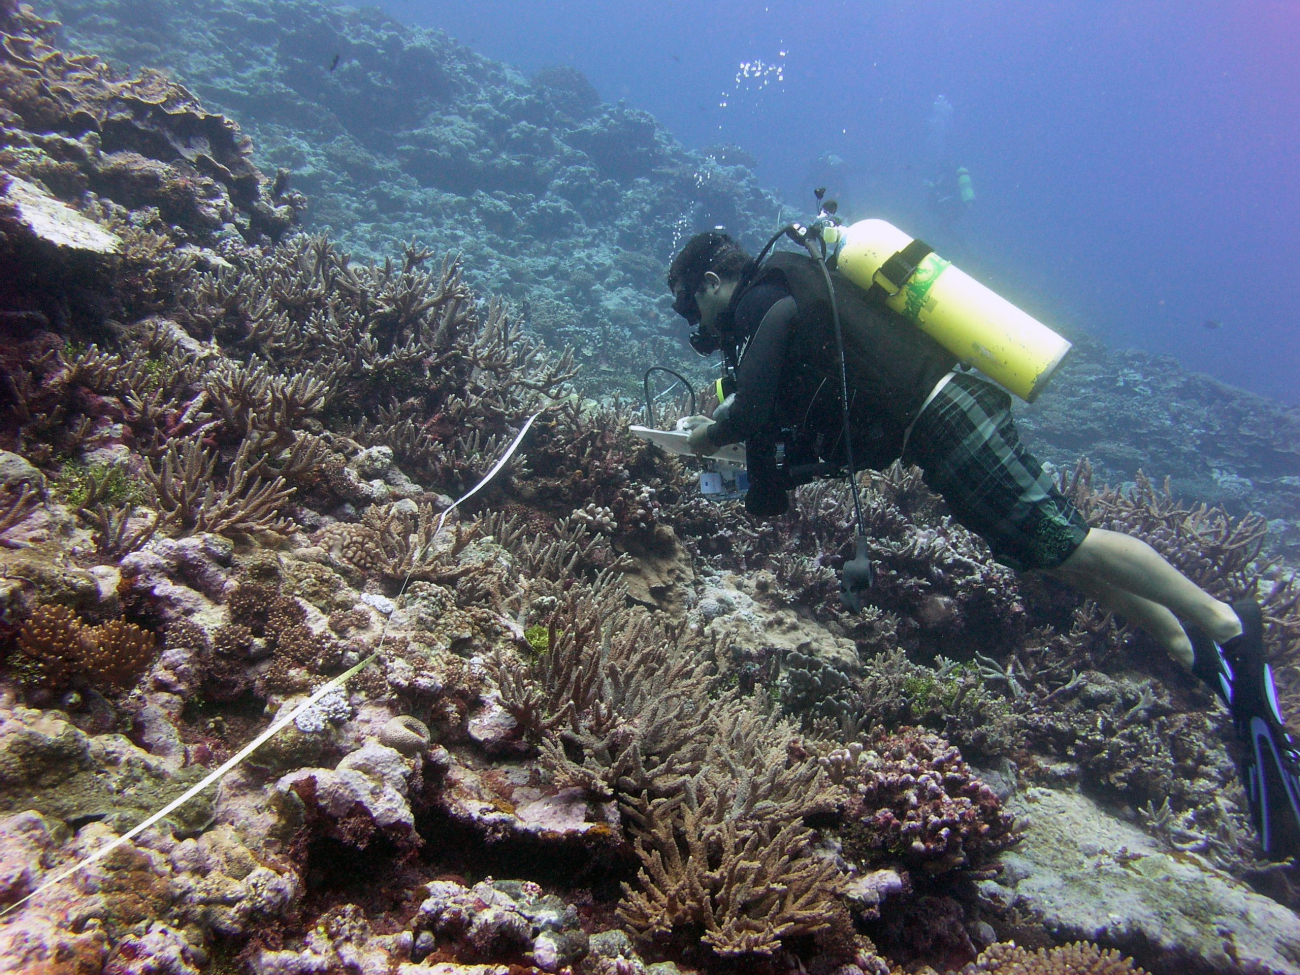 Scientific diver taking notes on reef transect